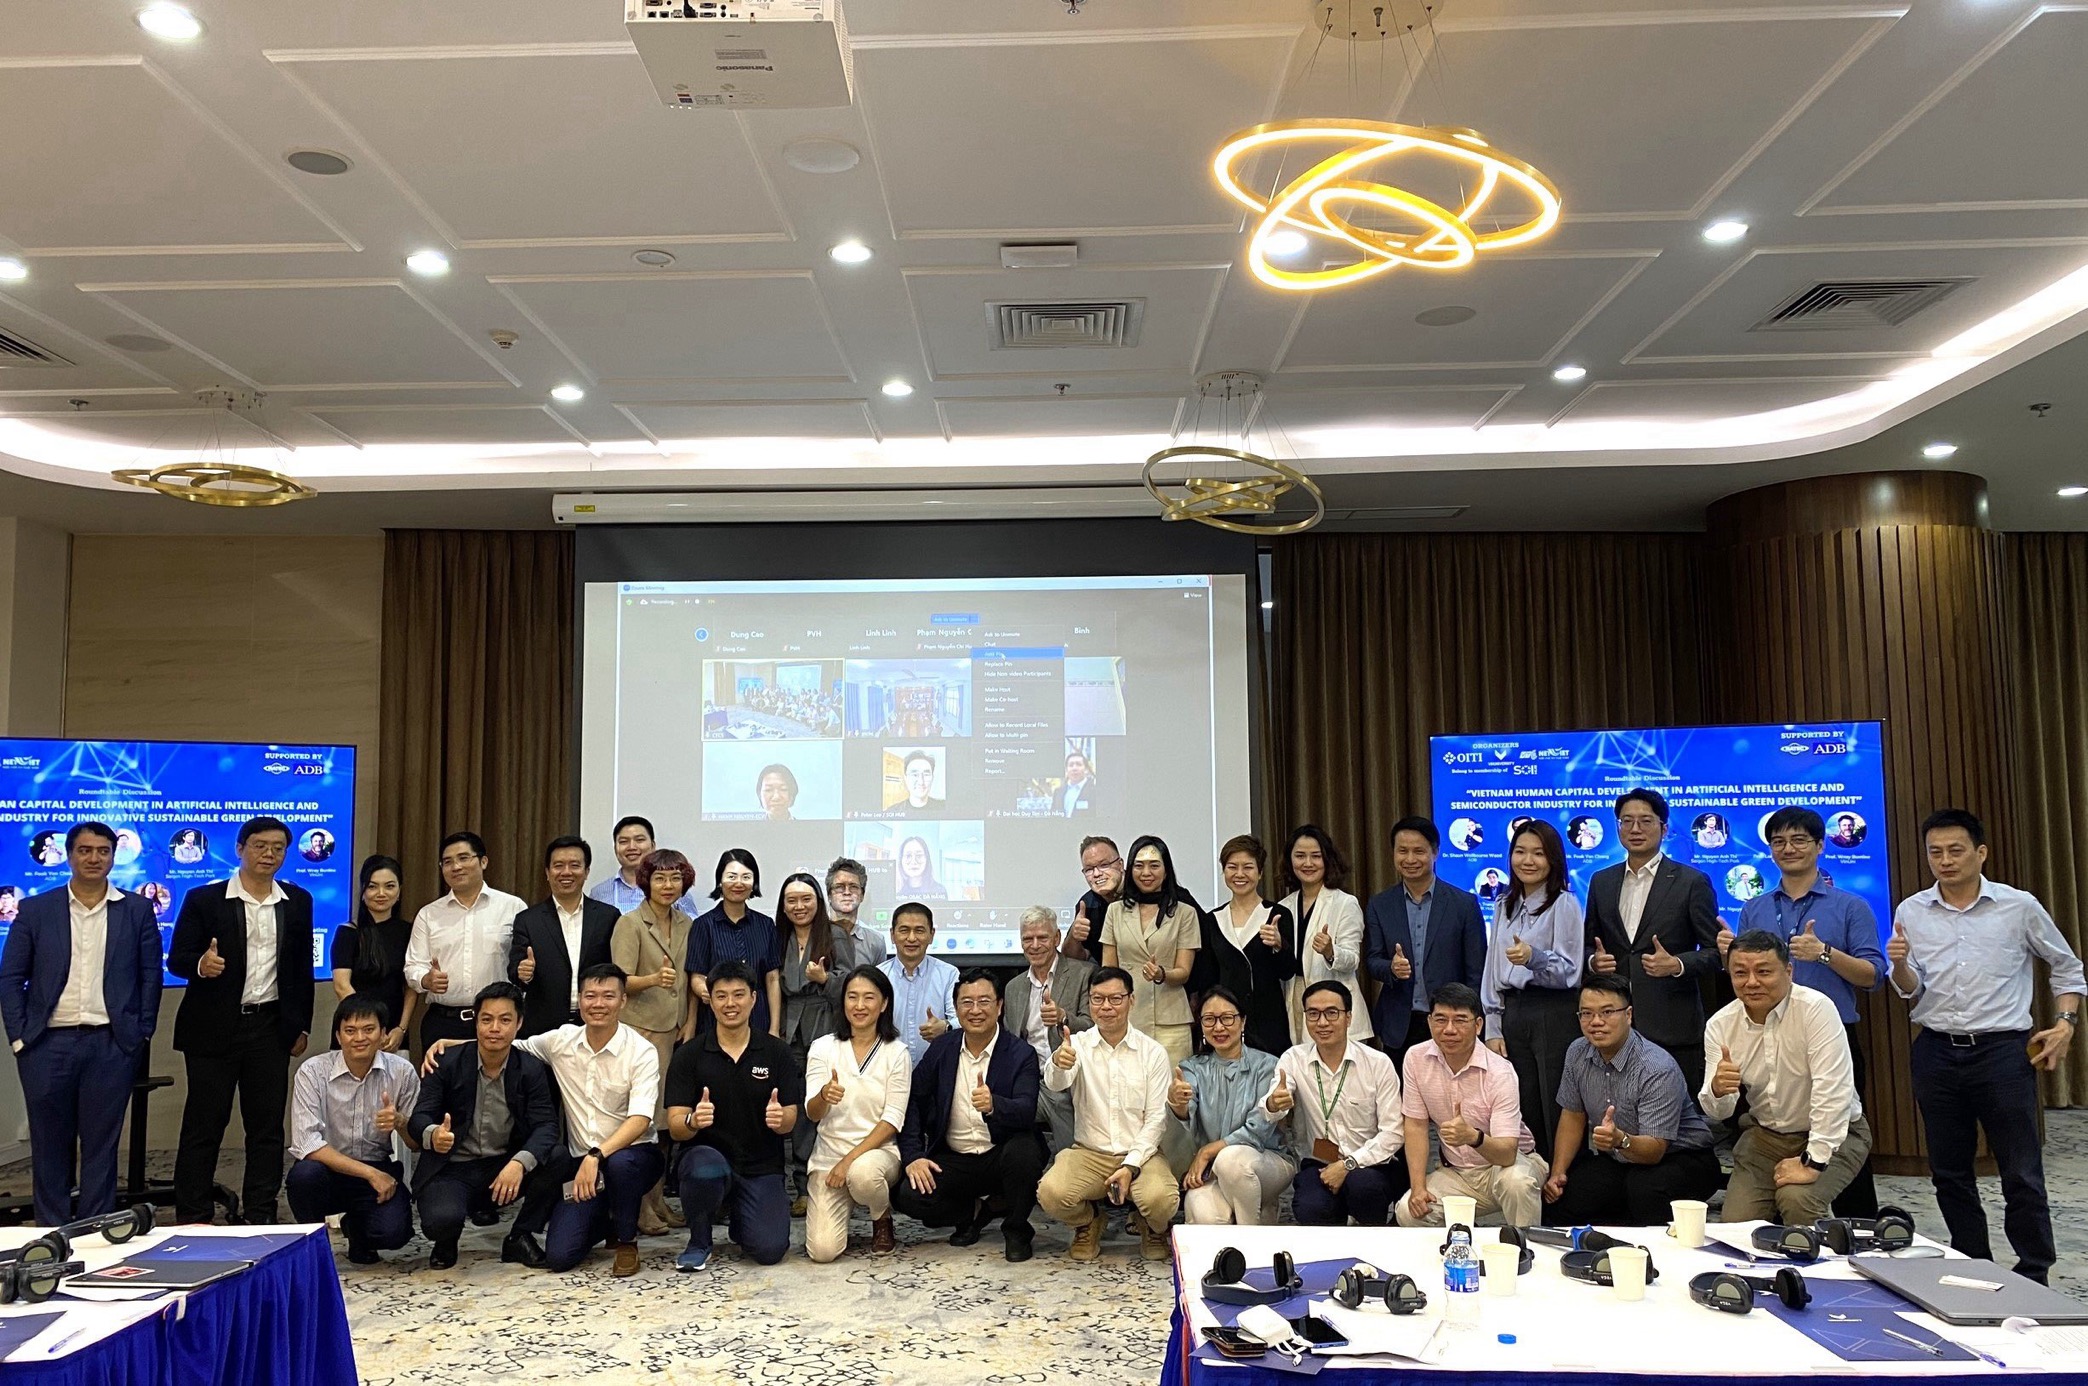 Stanford Lecturers and Scholars enthusiastic about proposing green technology development for Vietnam